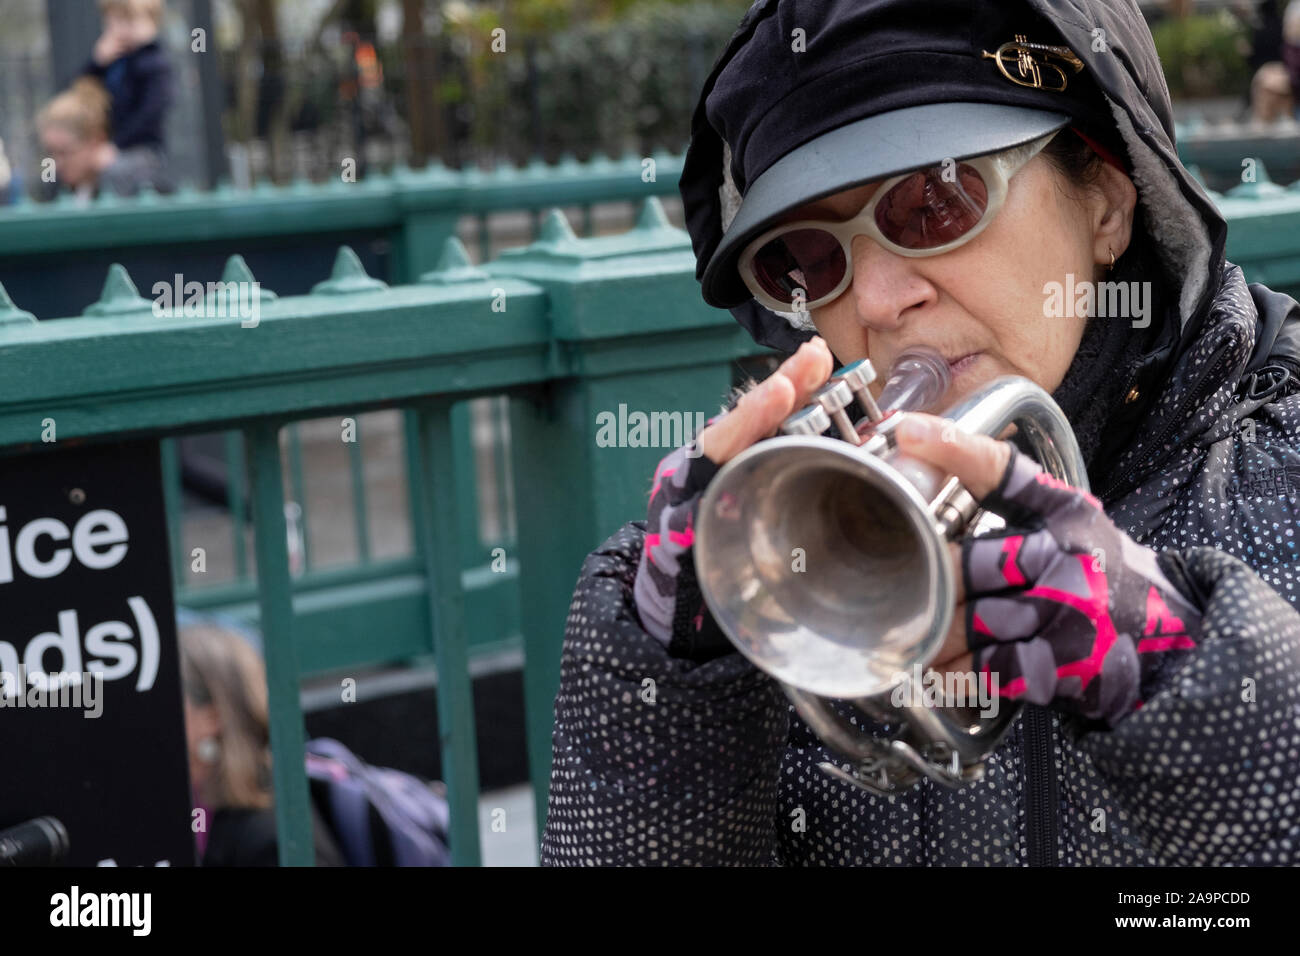 GINETTA'S VENDETTA. A middle aged pocket trumpet player performing outdoors on a cold Autumn day. In Union Square Park, Manhattan, New York City. Stock Photo